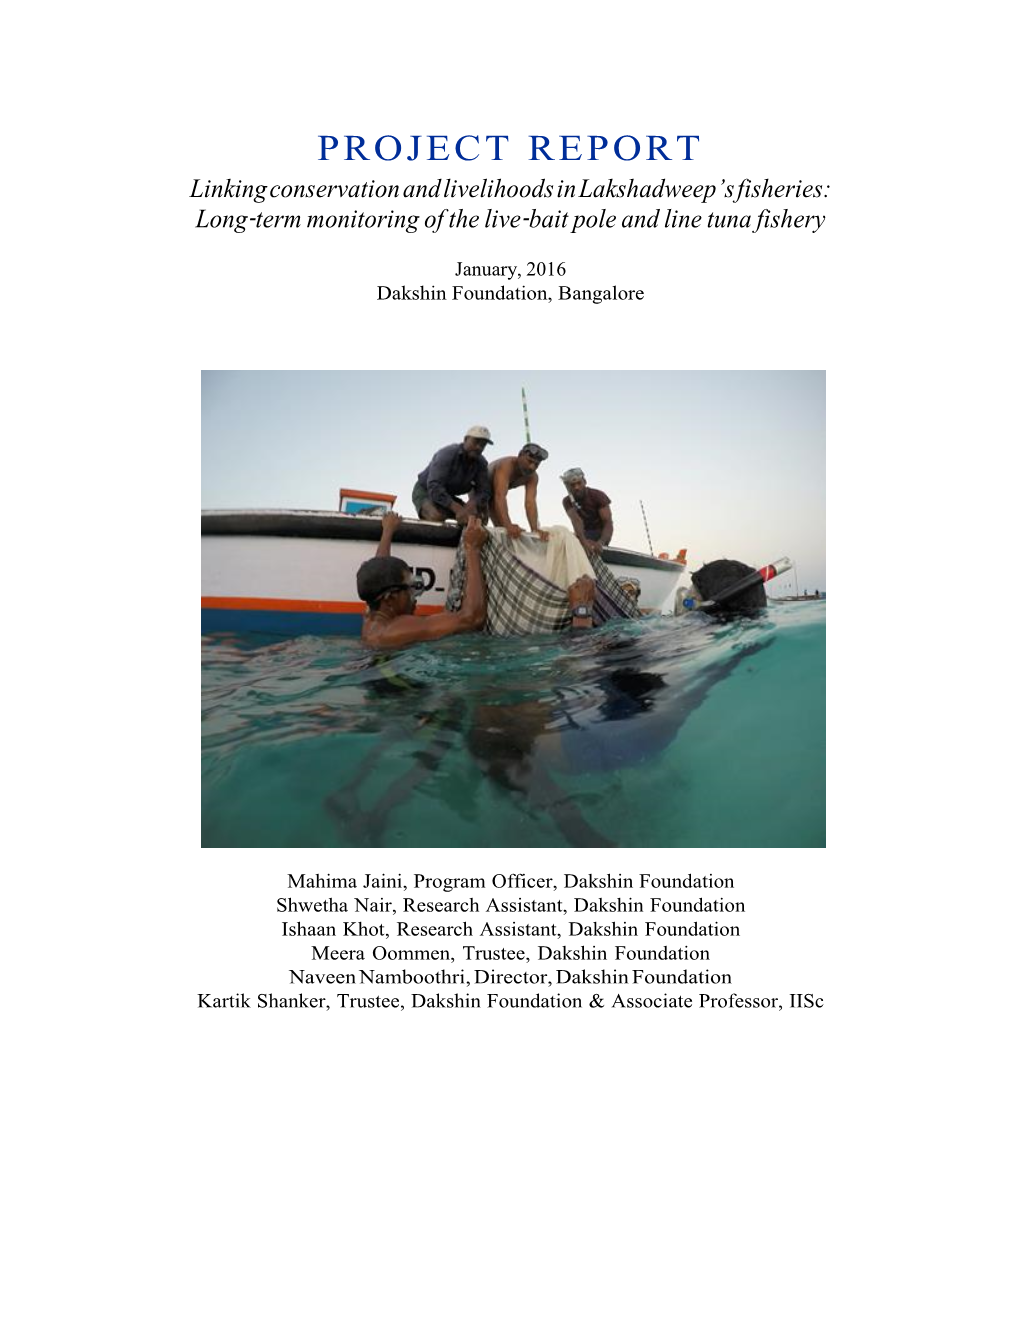 PROJECT REPORT Linking Conservation and Livelihoods in Lakshadweep’S Fisheries: Long-Term Monitoring of the Live-Bait Pole and Line Tuna Fishery